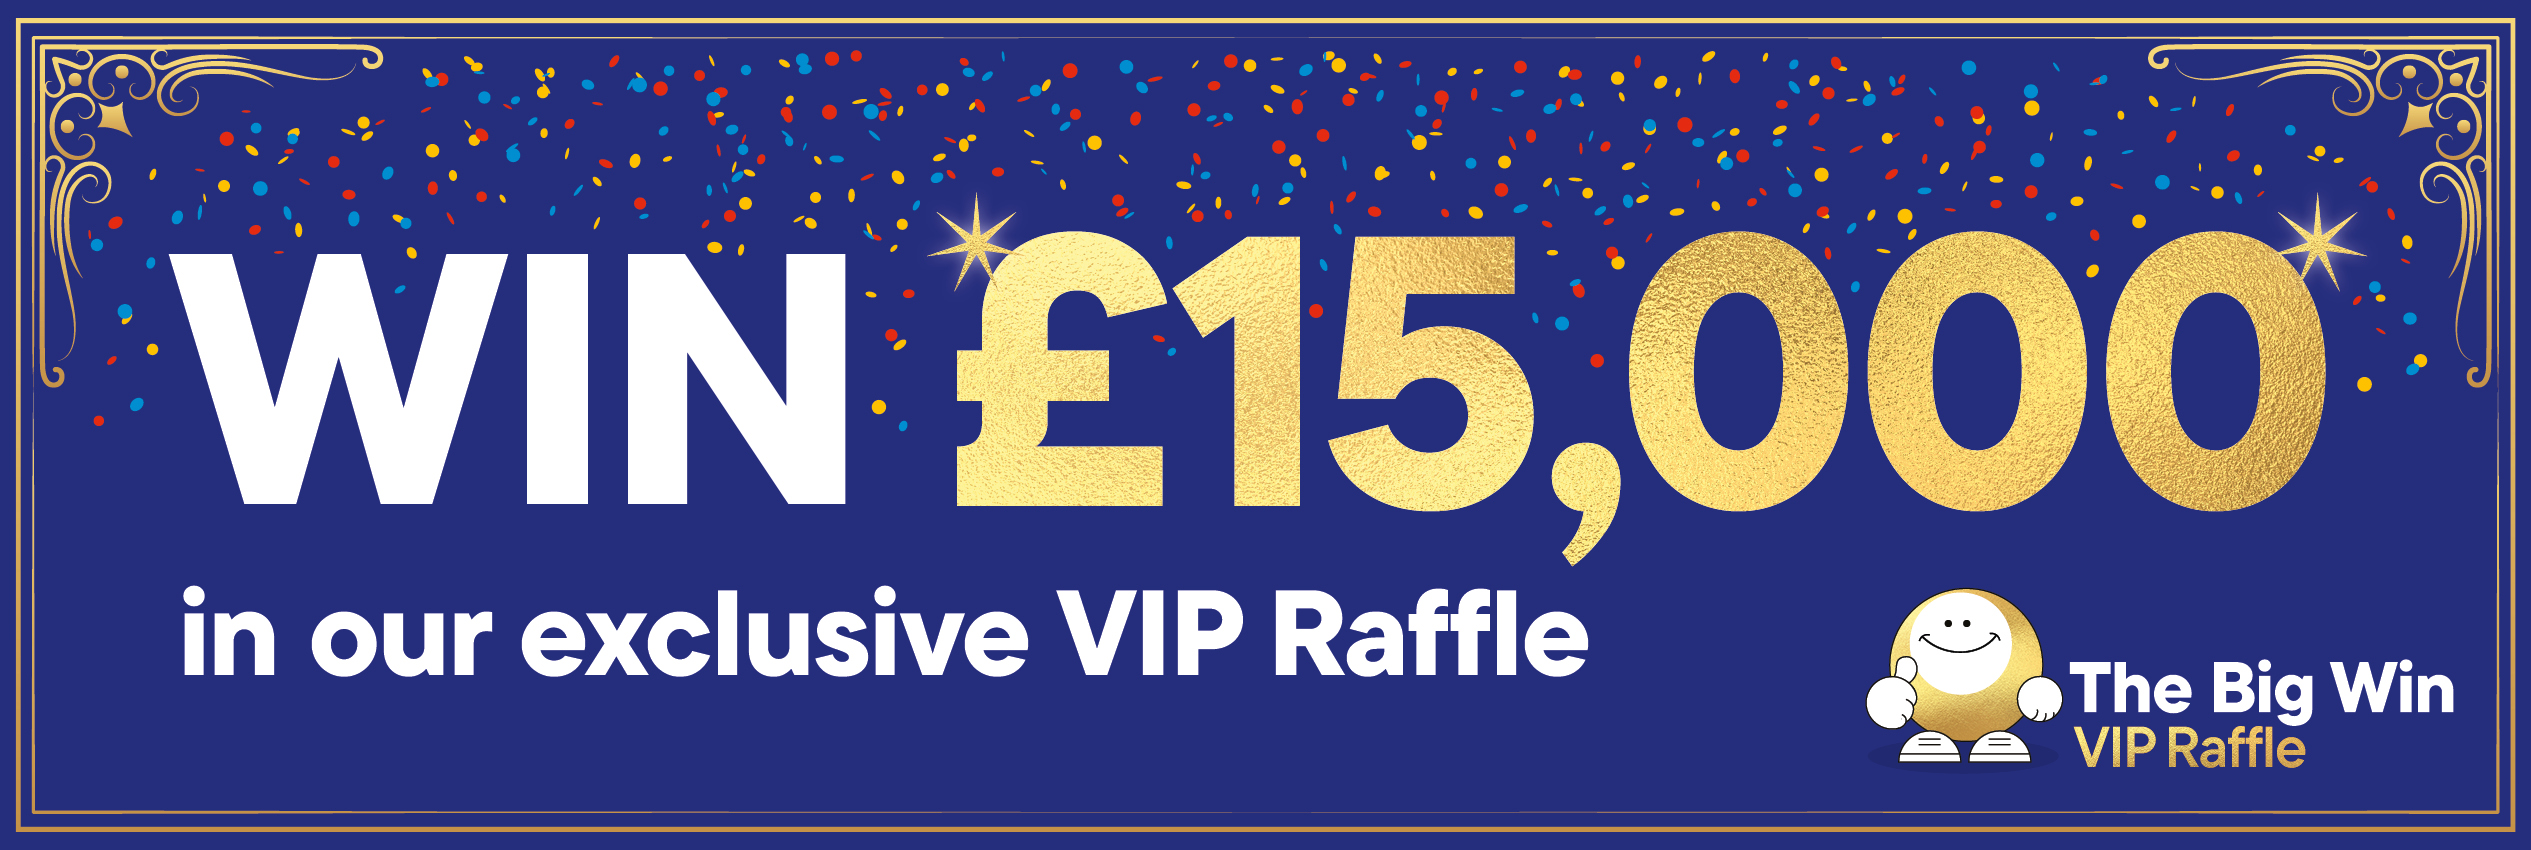 Win £15,000 in our exclusive raffle. Just £1 per entry.